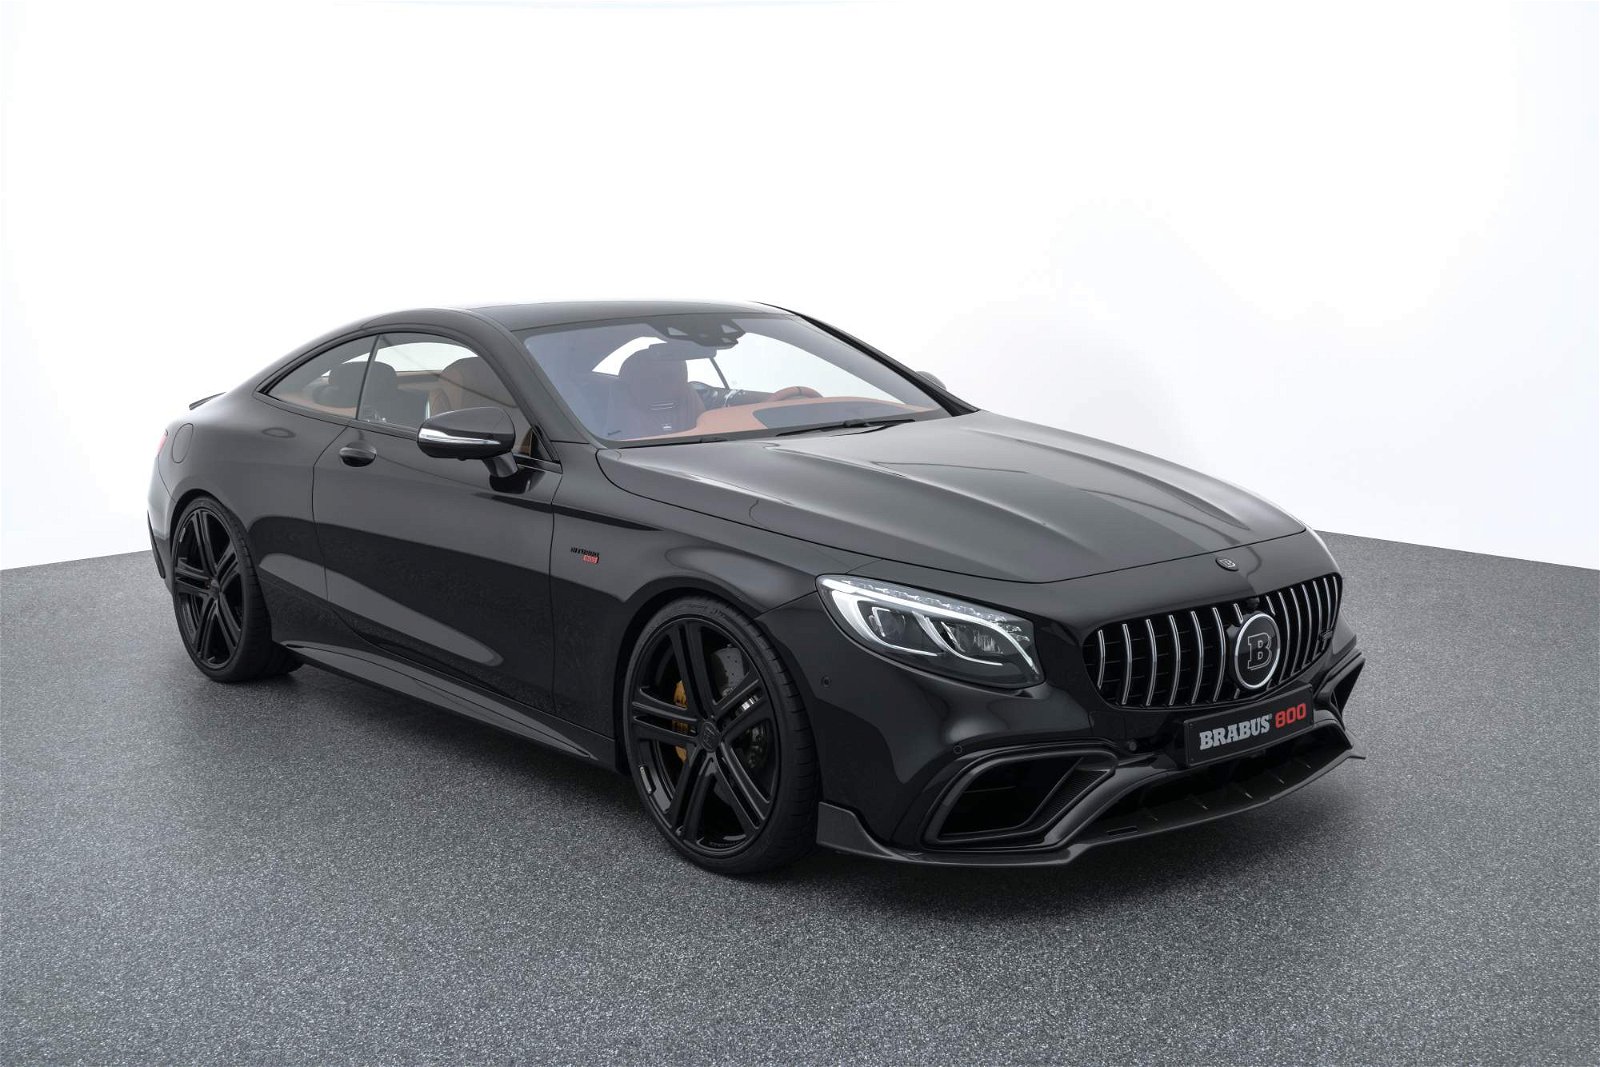 Brabus-800-based-on-Mercedes-AMG-S63-4MATIC+-Coupe-13